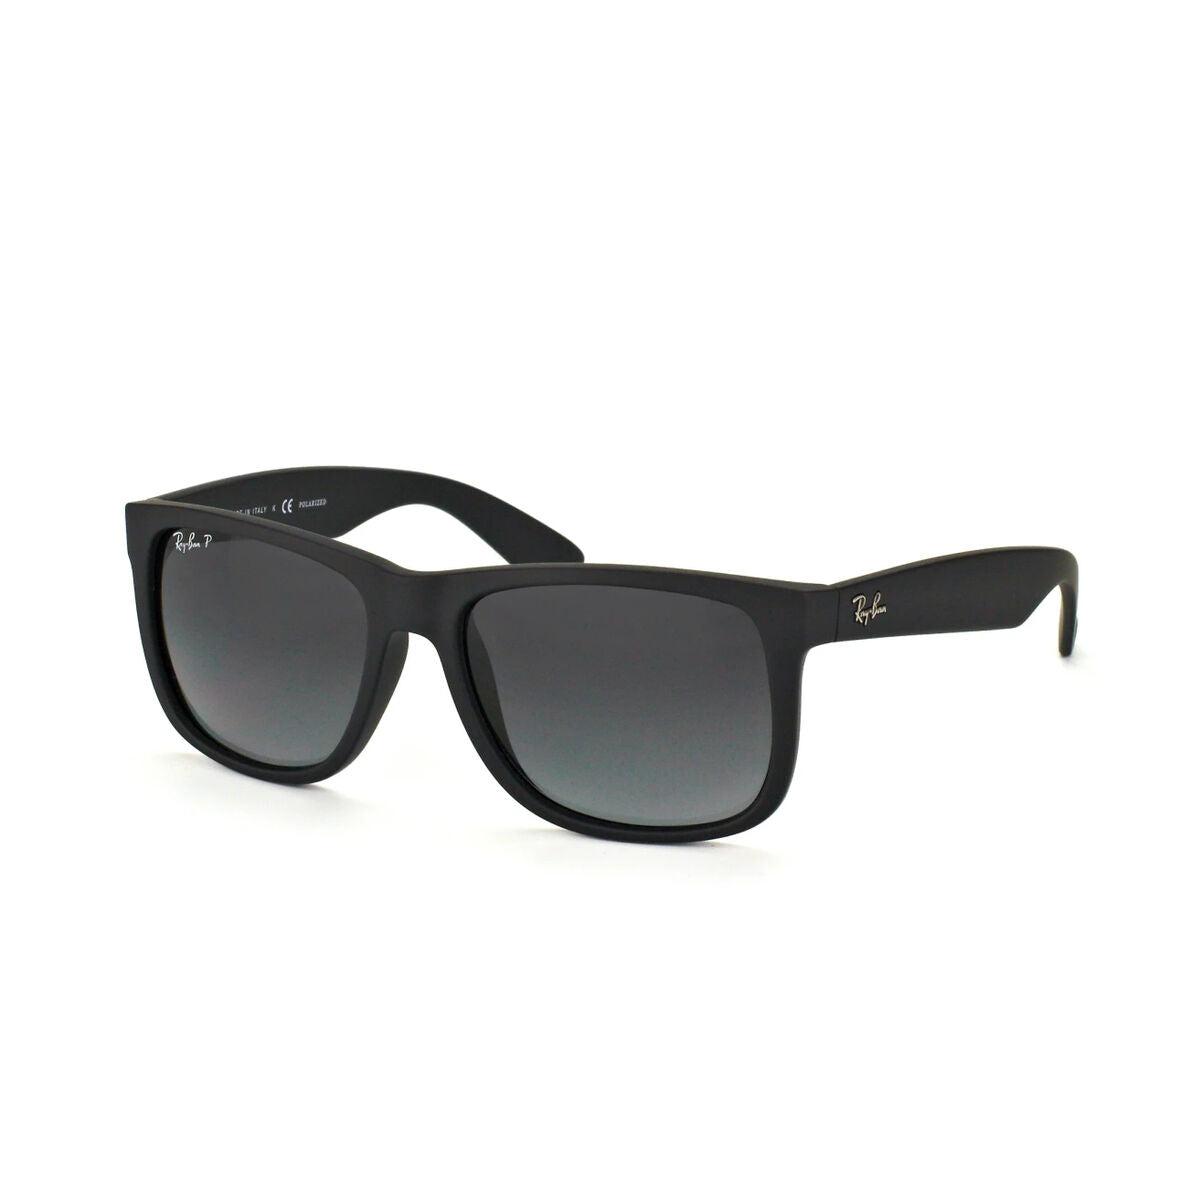 Ray-Ban Unisex Sunglasses Rb4165-622-t3 (55 Mm) in Black | Lyst